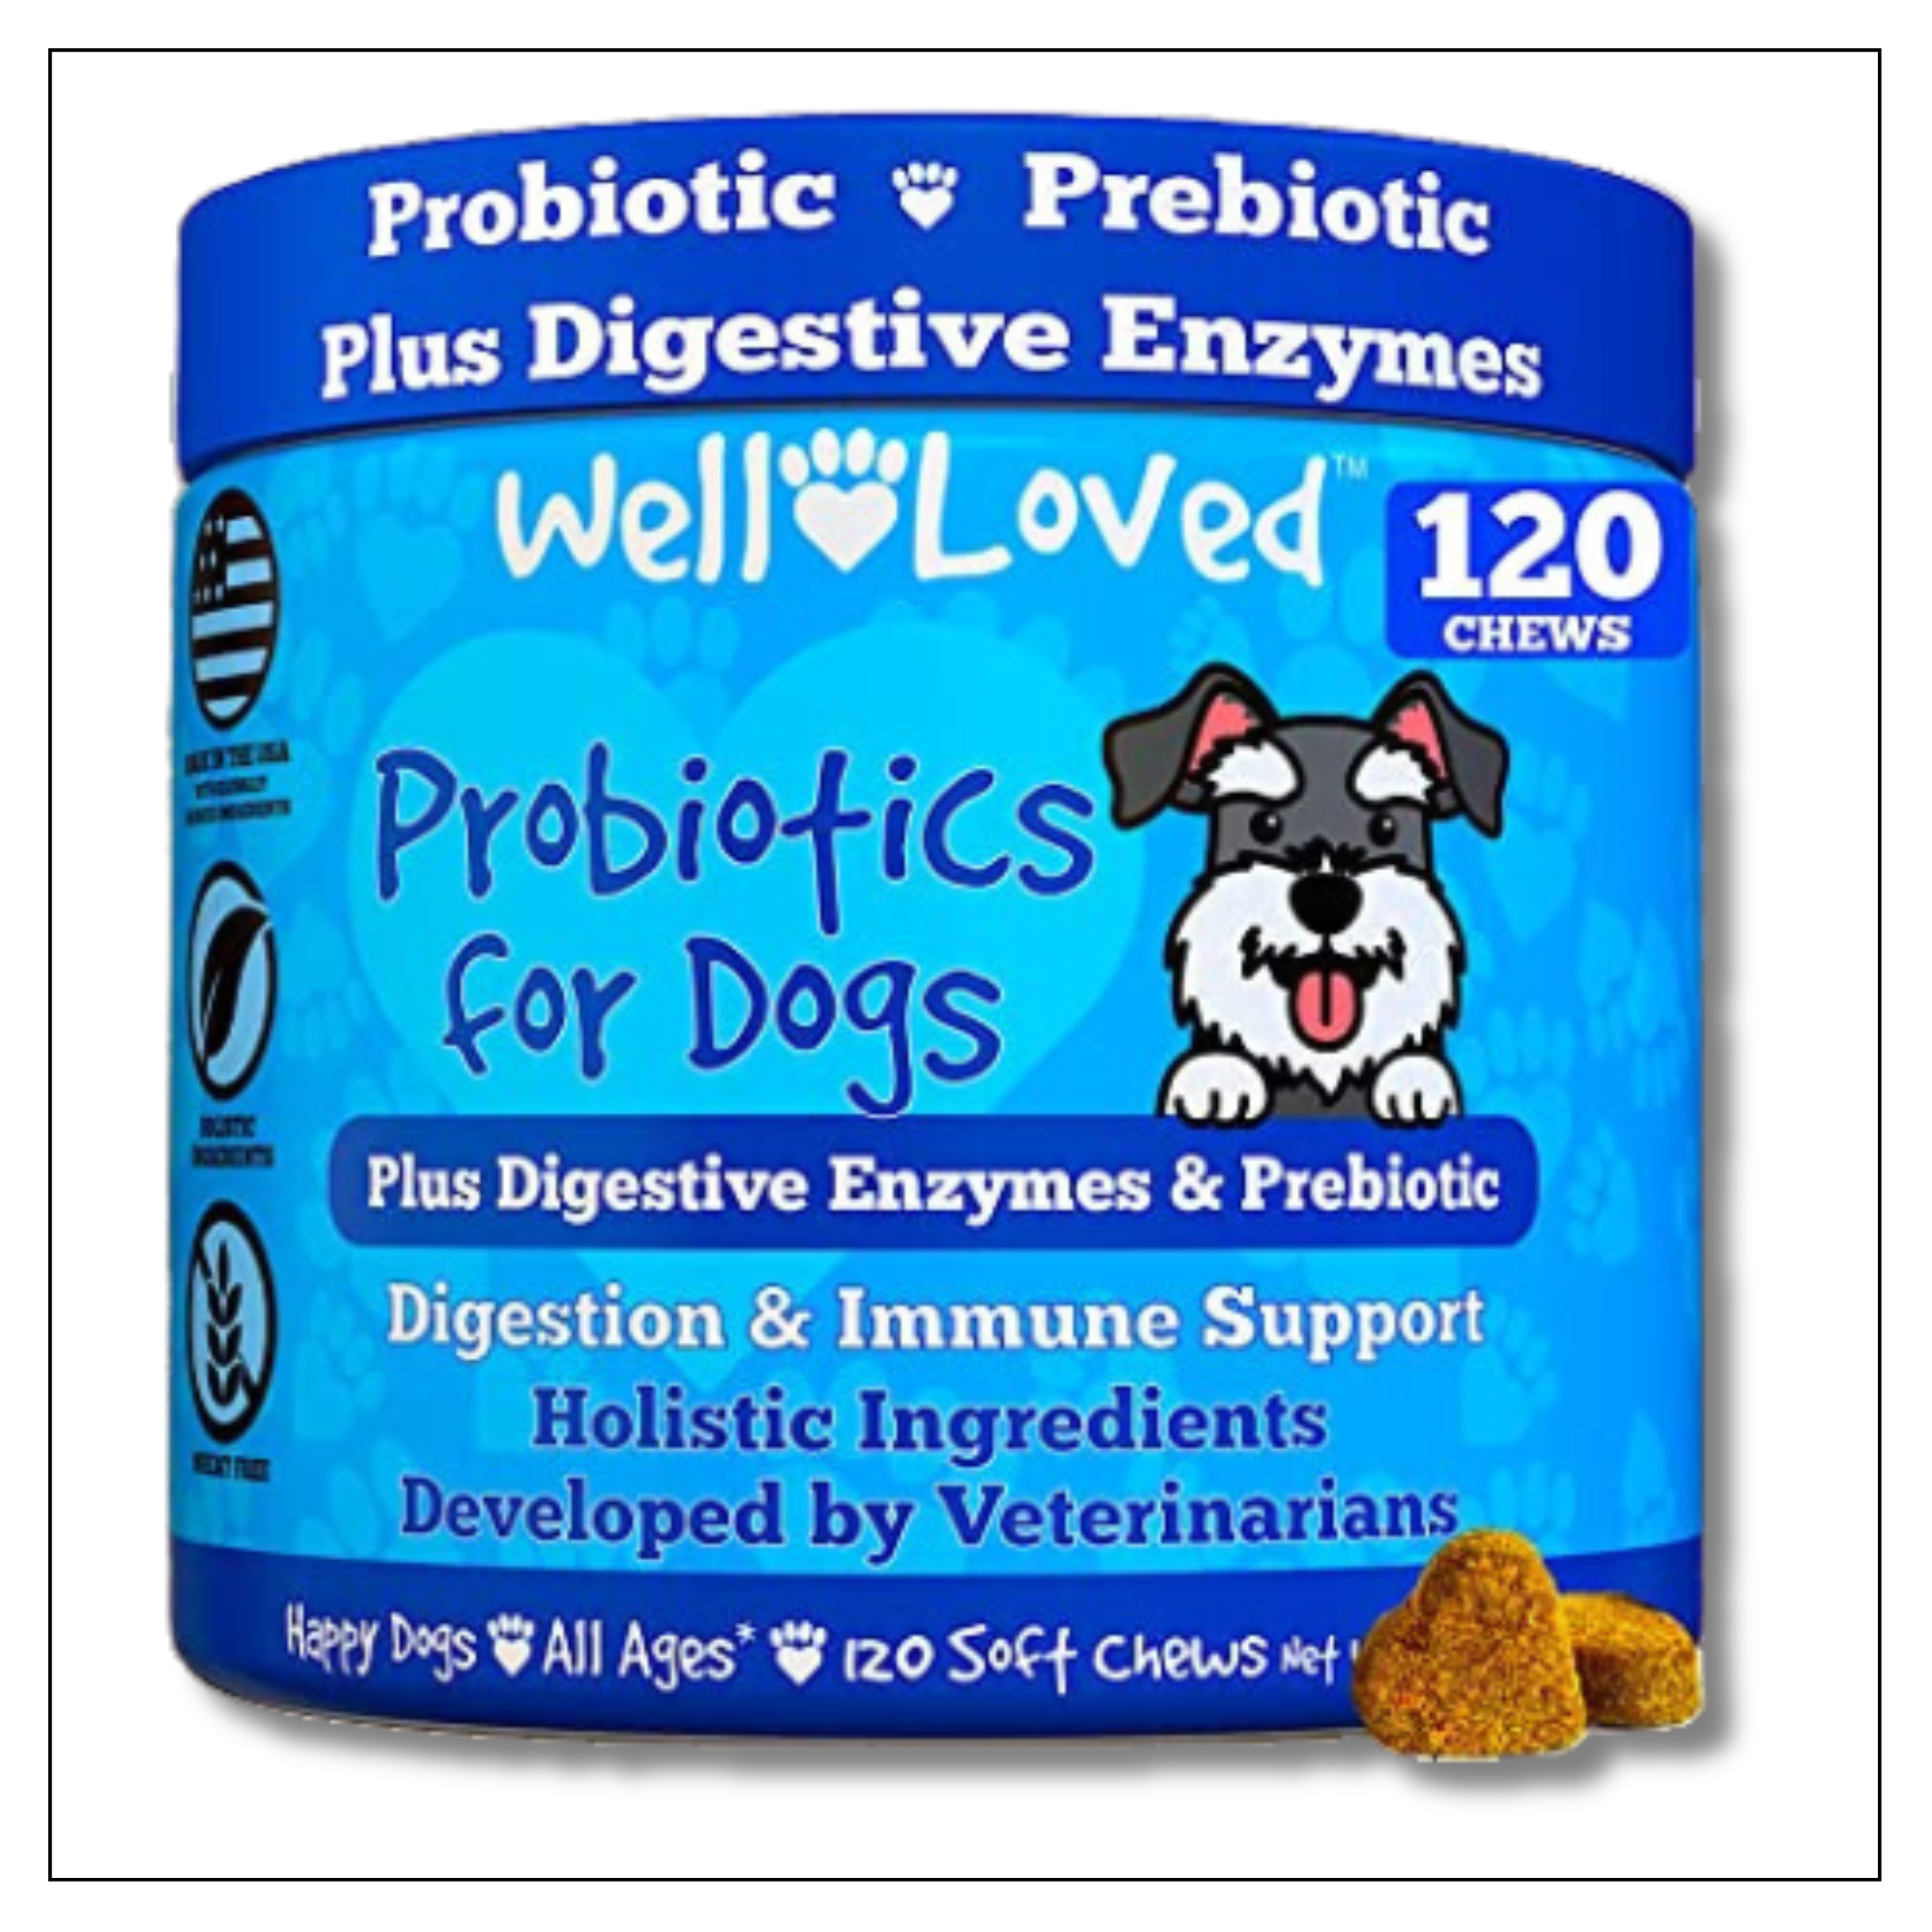 Well Loved Probiotics for Dogs